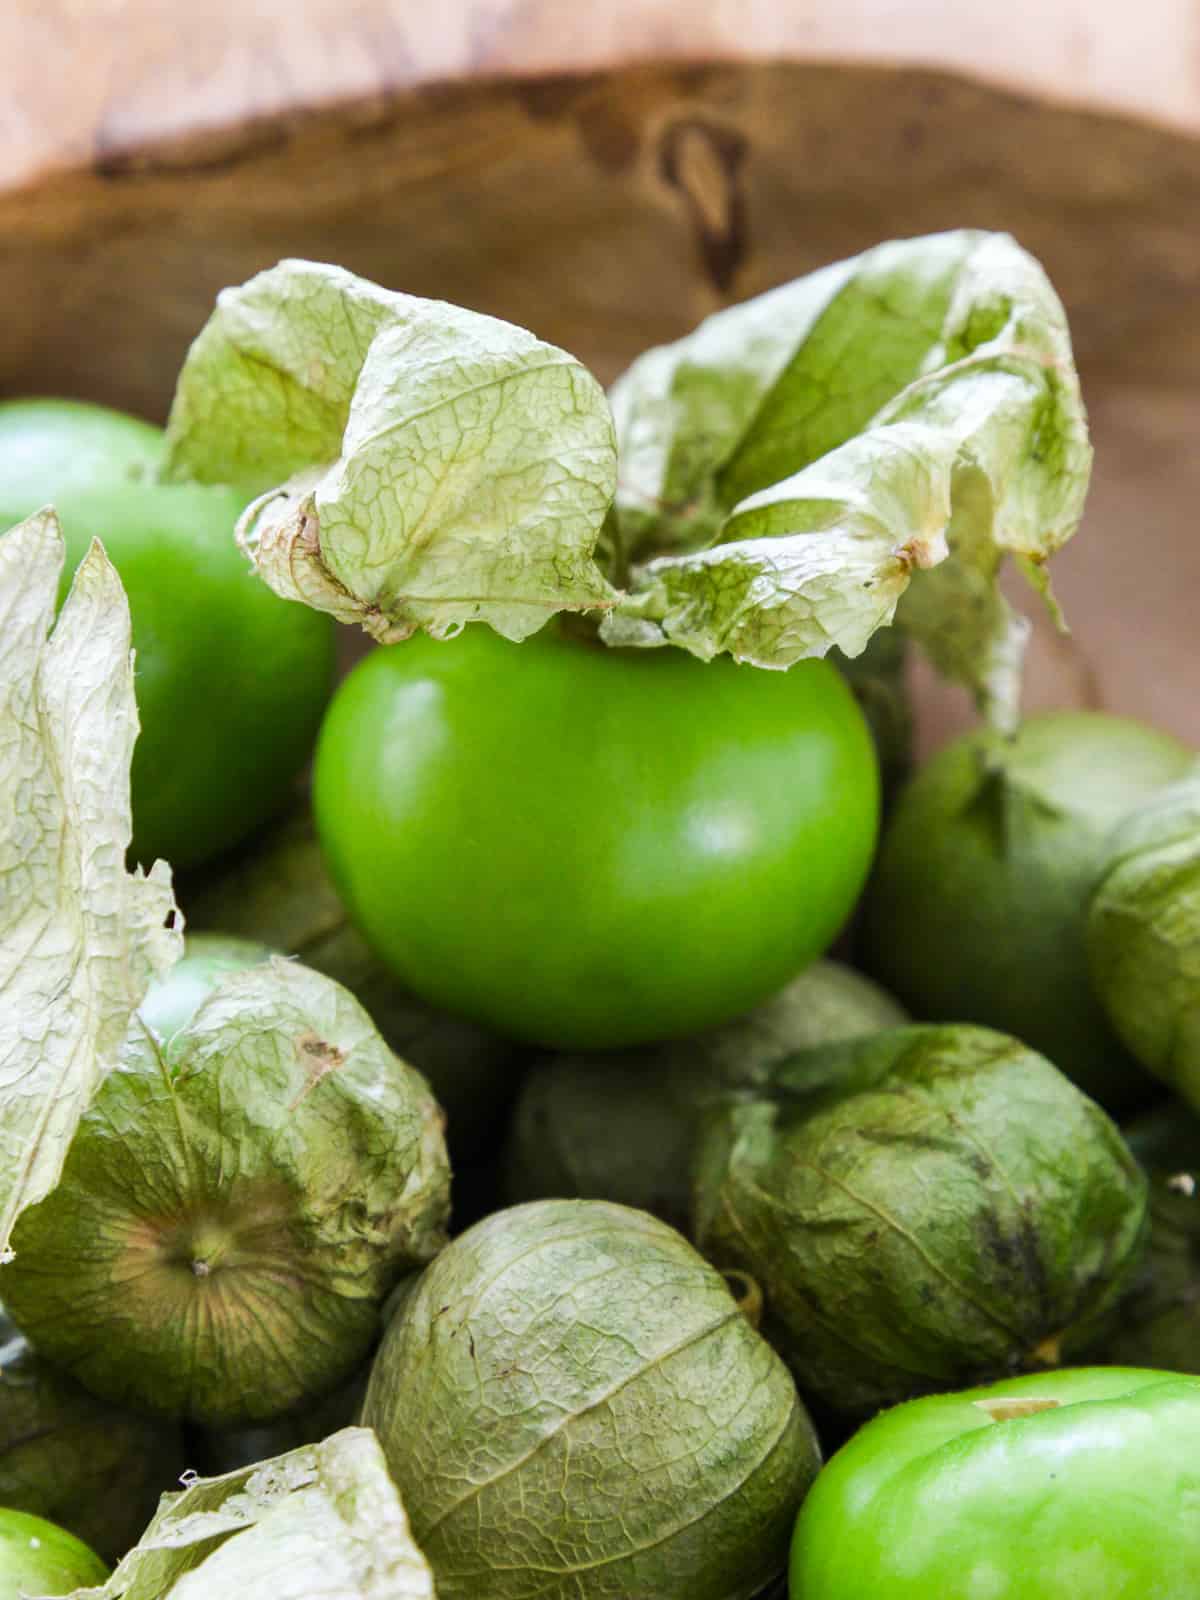 Close up view of green tomatillos for use in a recipe, some still have their paper husks on them, to be used in a Mexican food recipe.